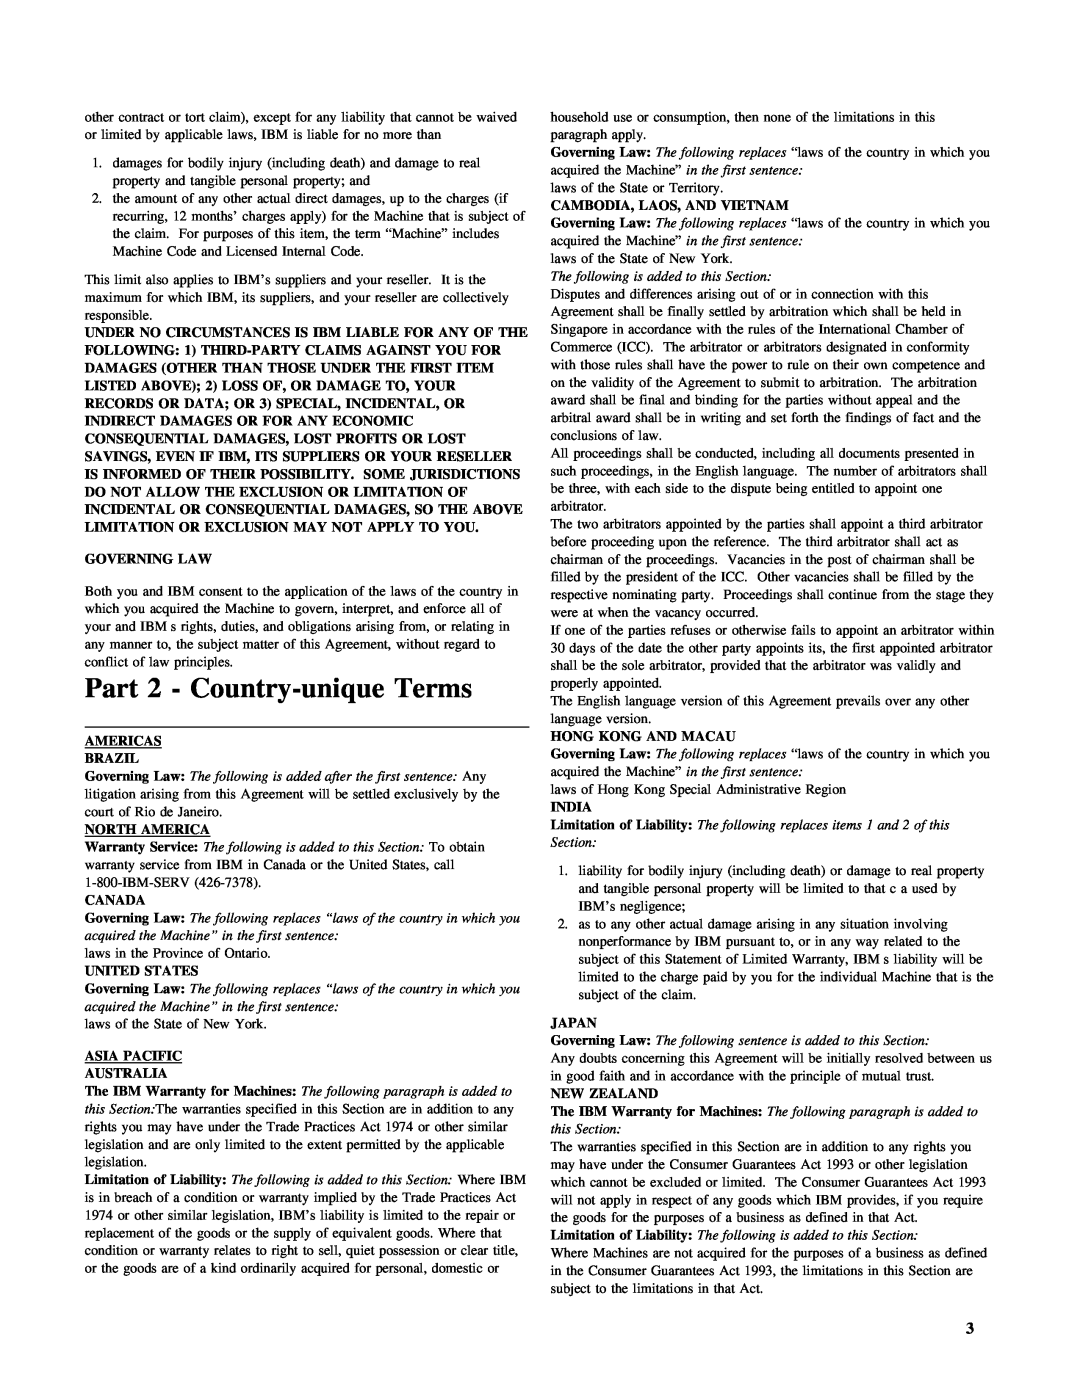 IBM 10K3791 Part 2 - Country-unique Terms, Governing Law, Americas Brazil, North America, Canada, United States, India 